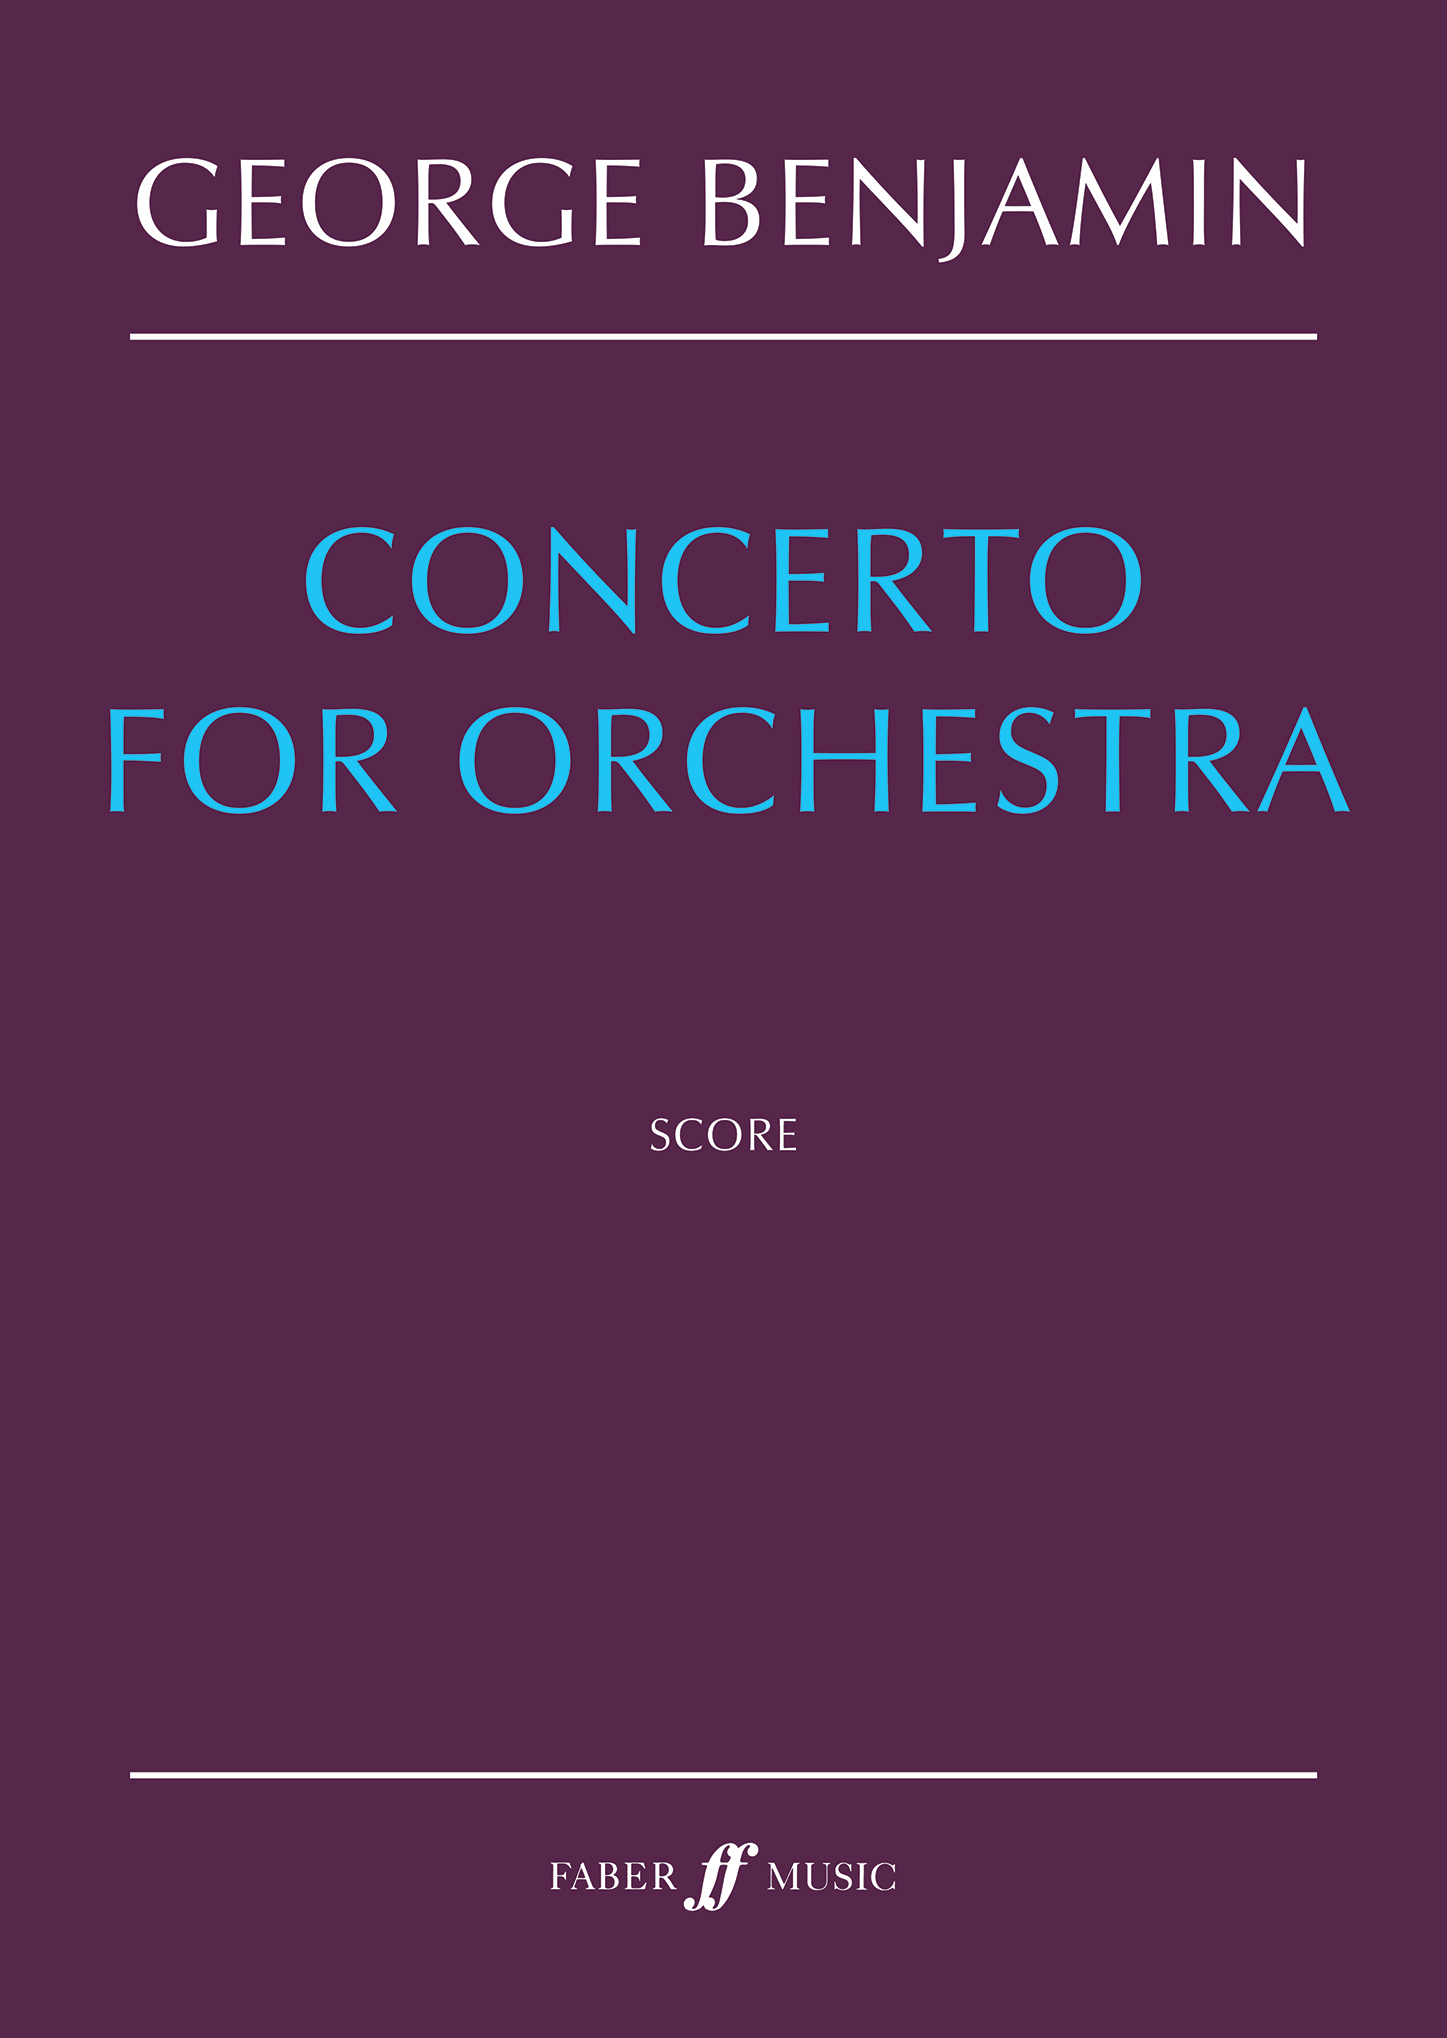 Benjamin Concerto For Orchestra Score Sheet Music Songbook